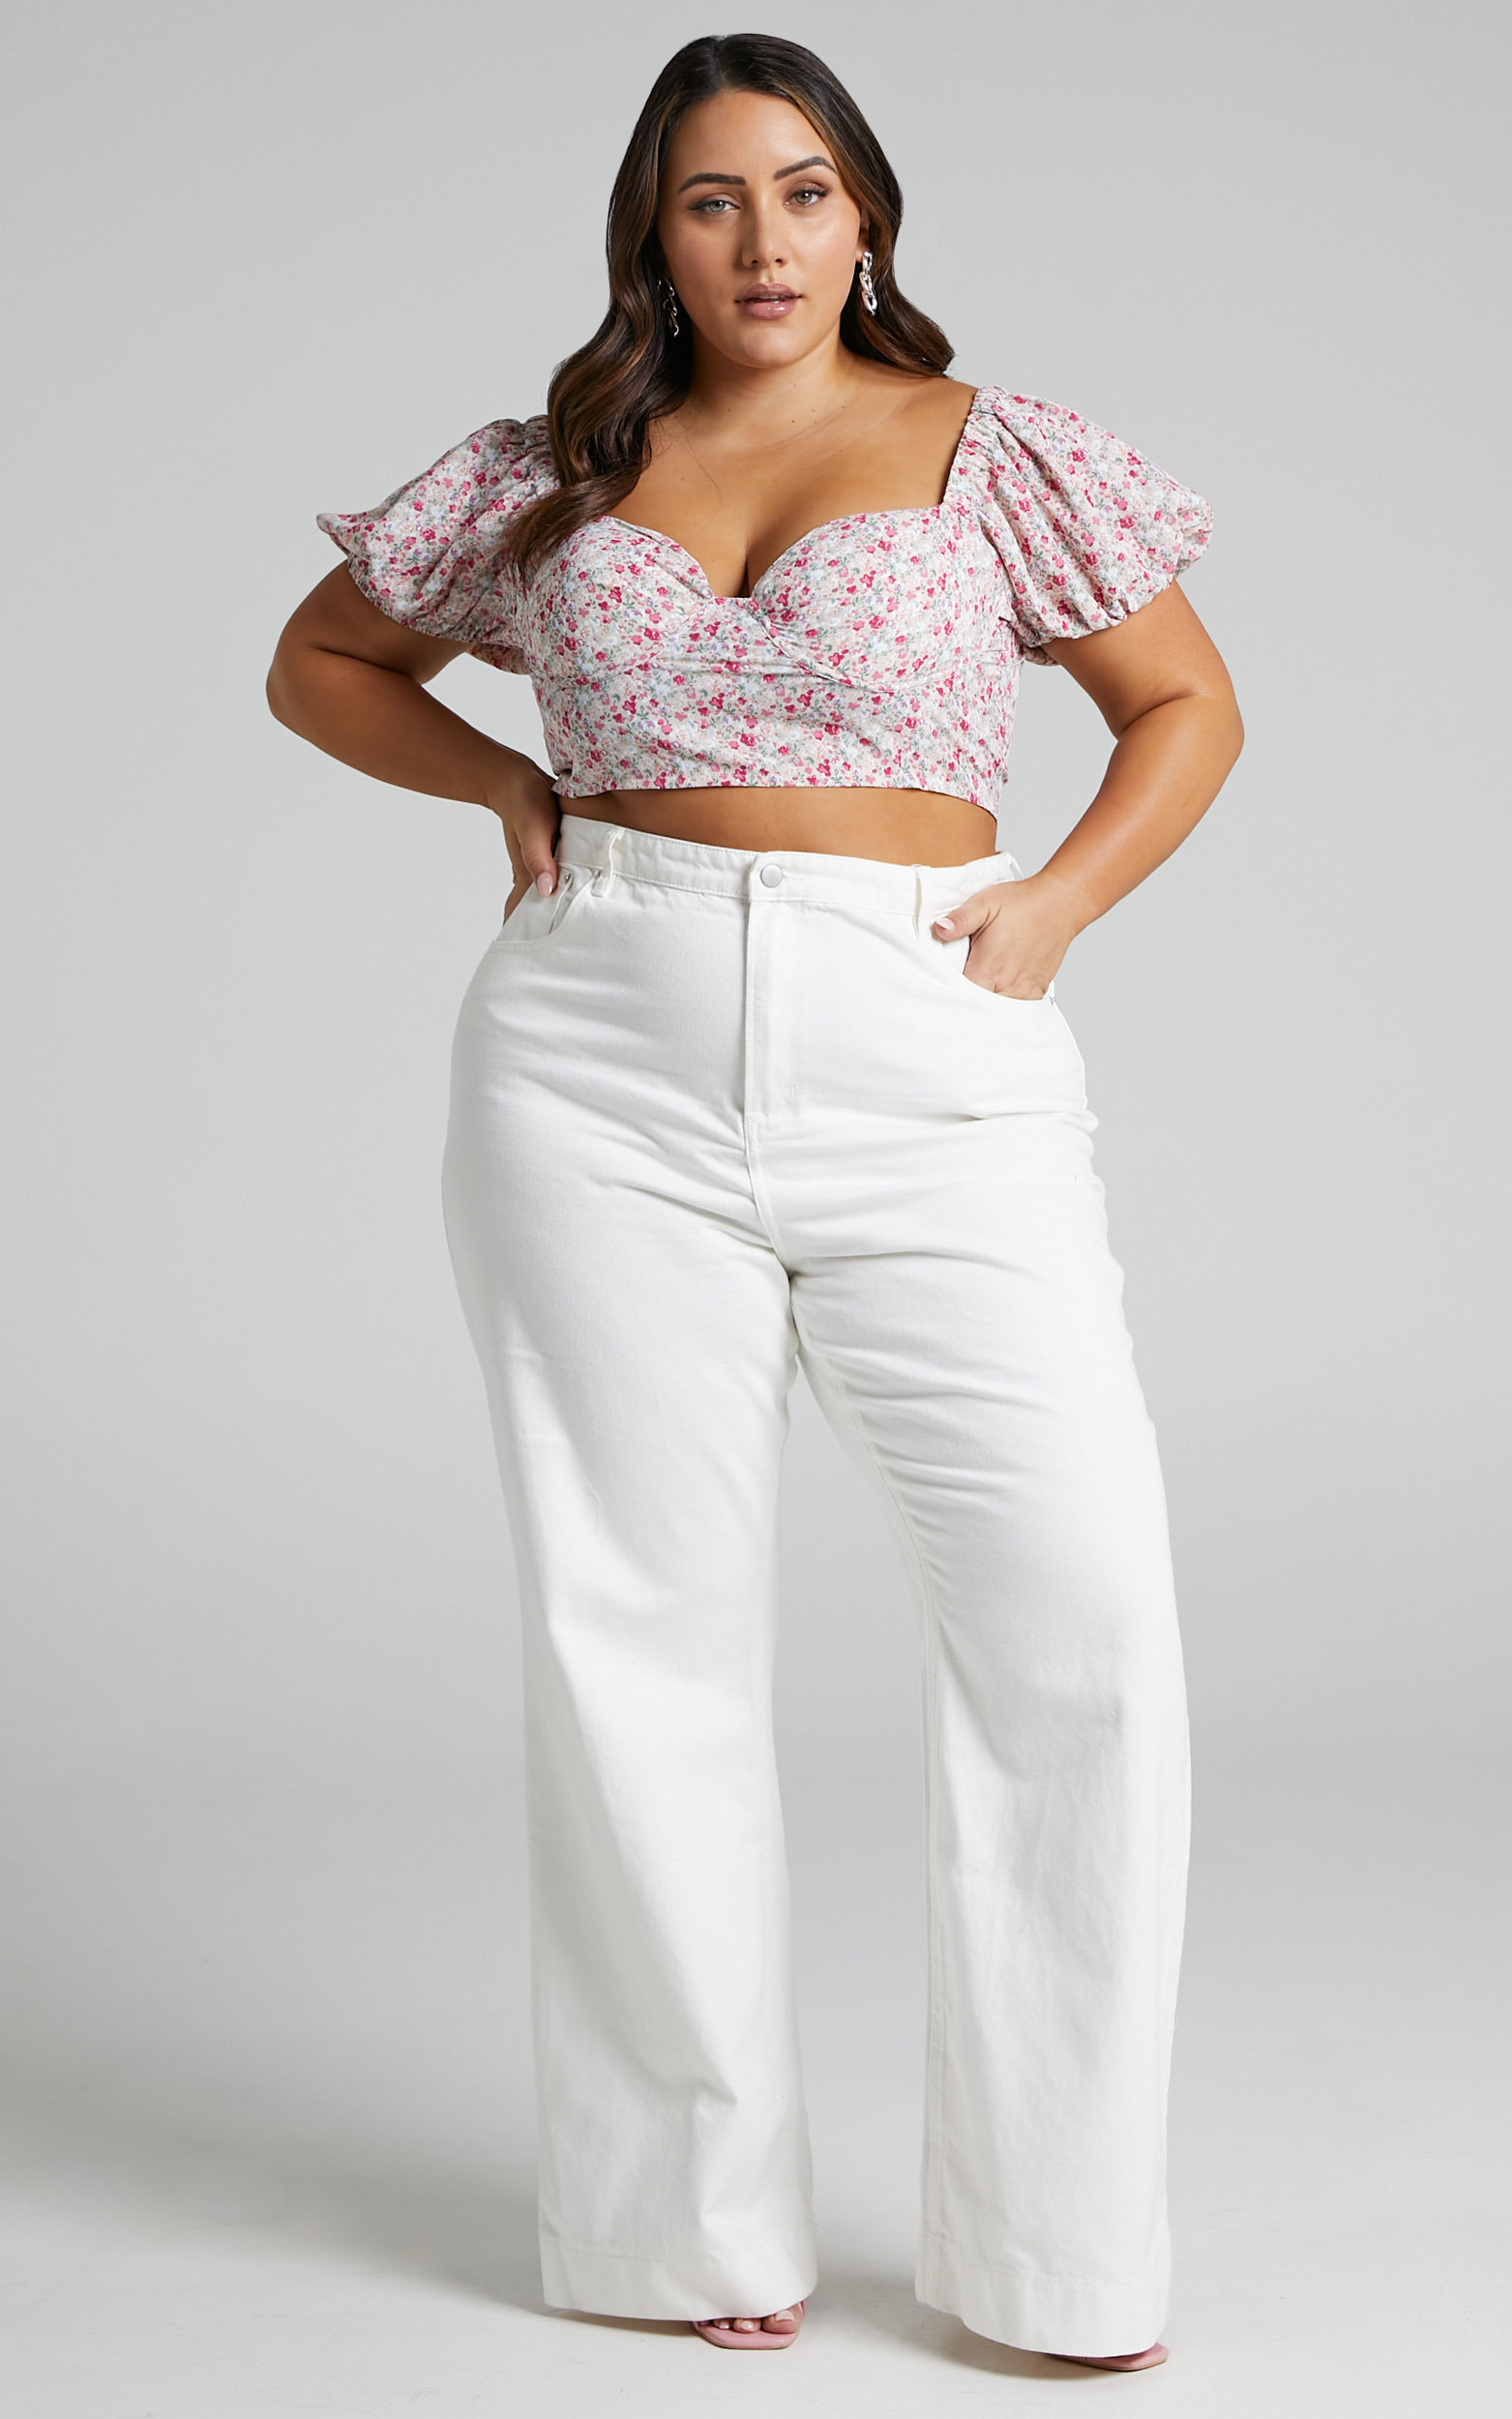 Solania Puff Sleeve Bust Cup Crop Top in White Floral - 04, WHT1, hi-res image number null